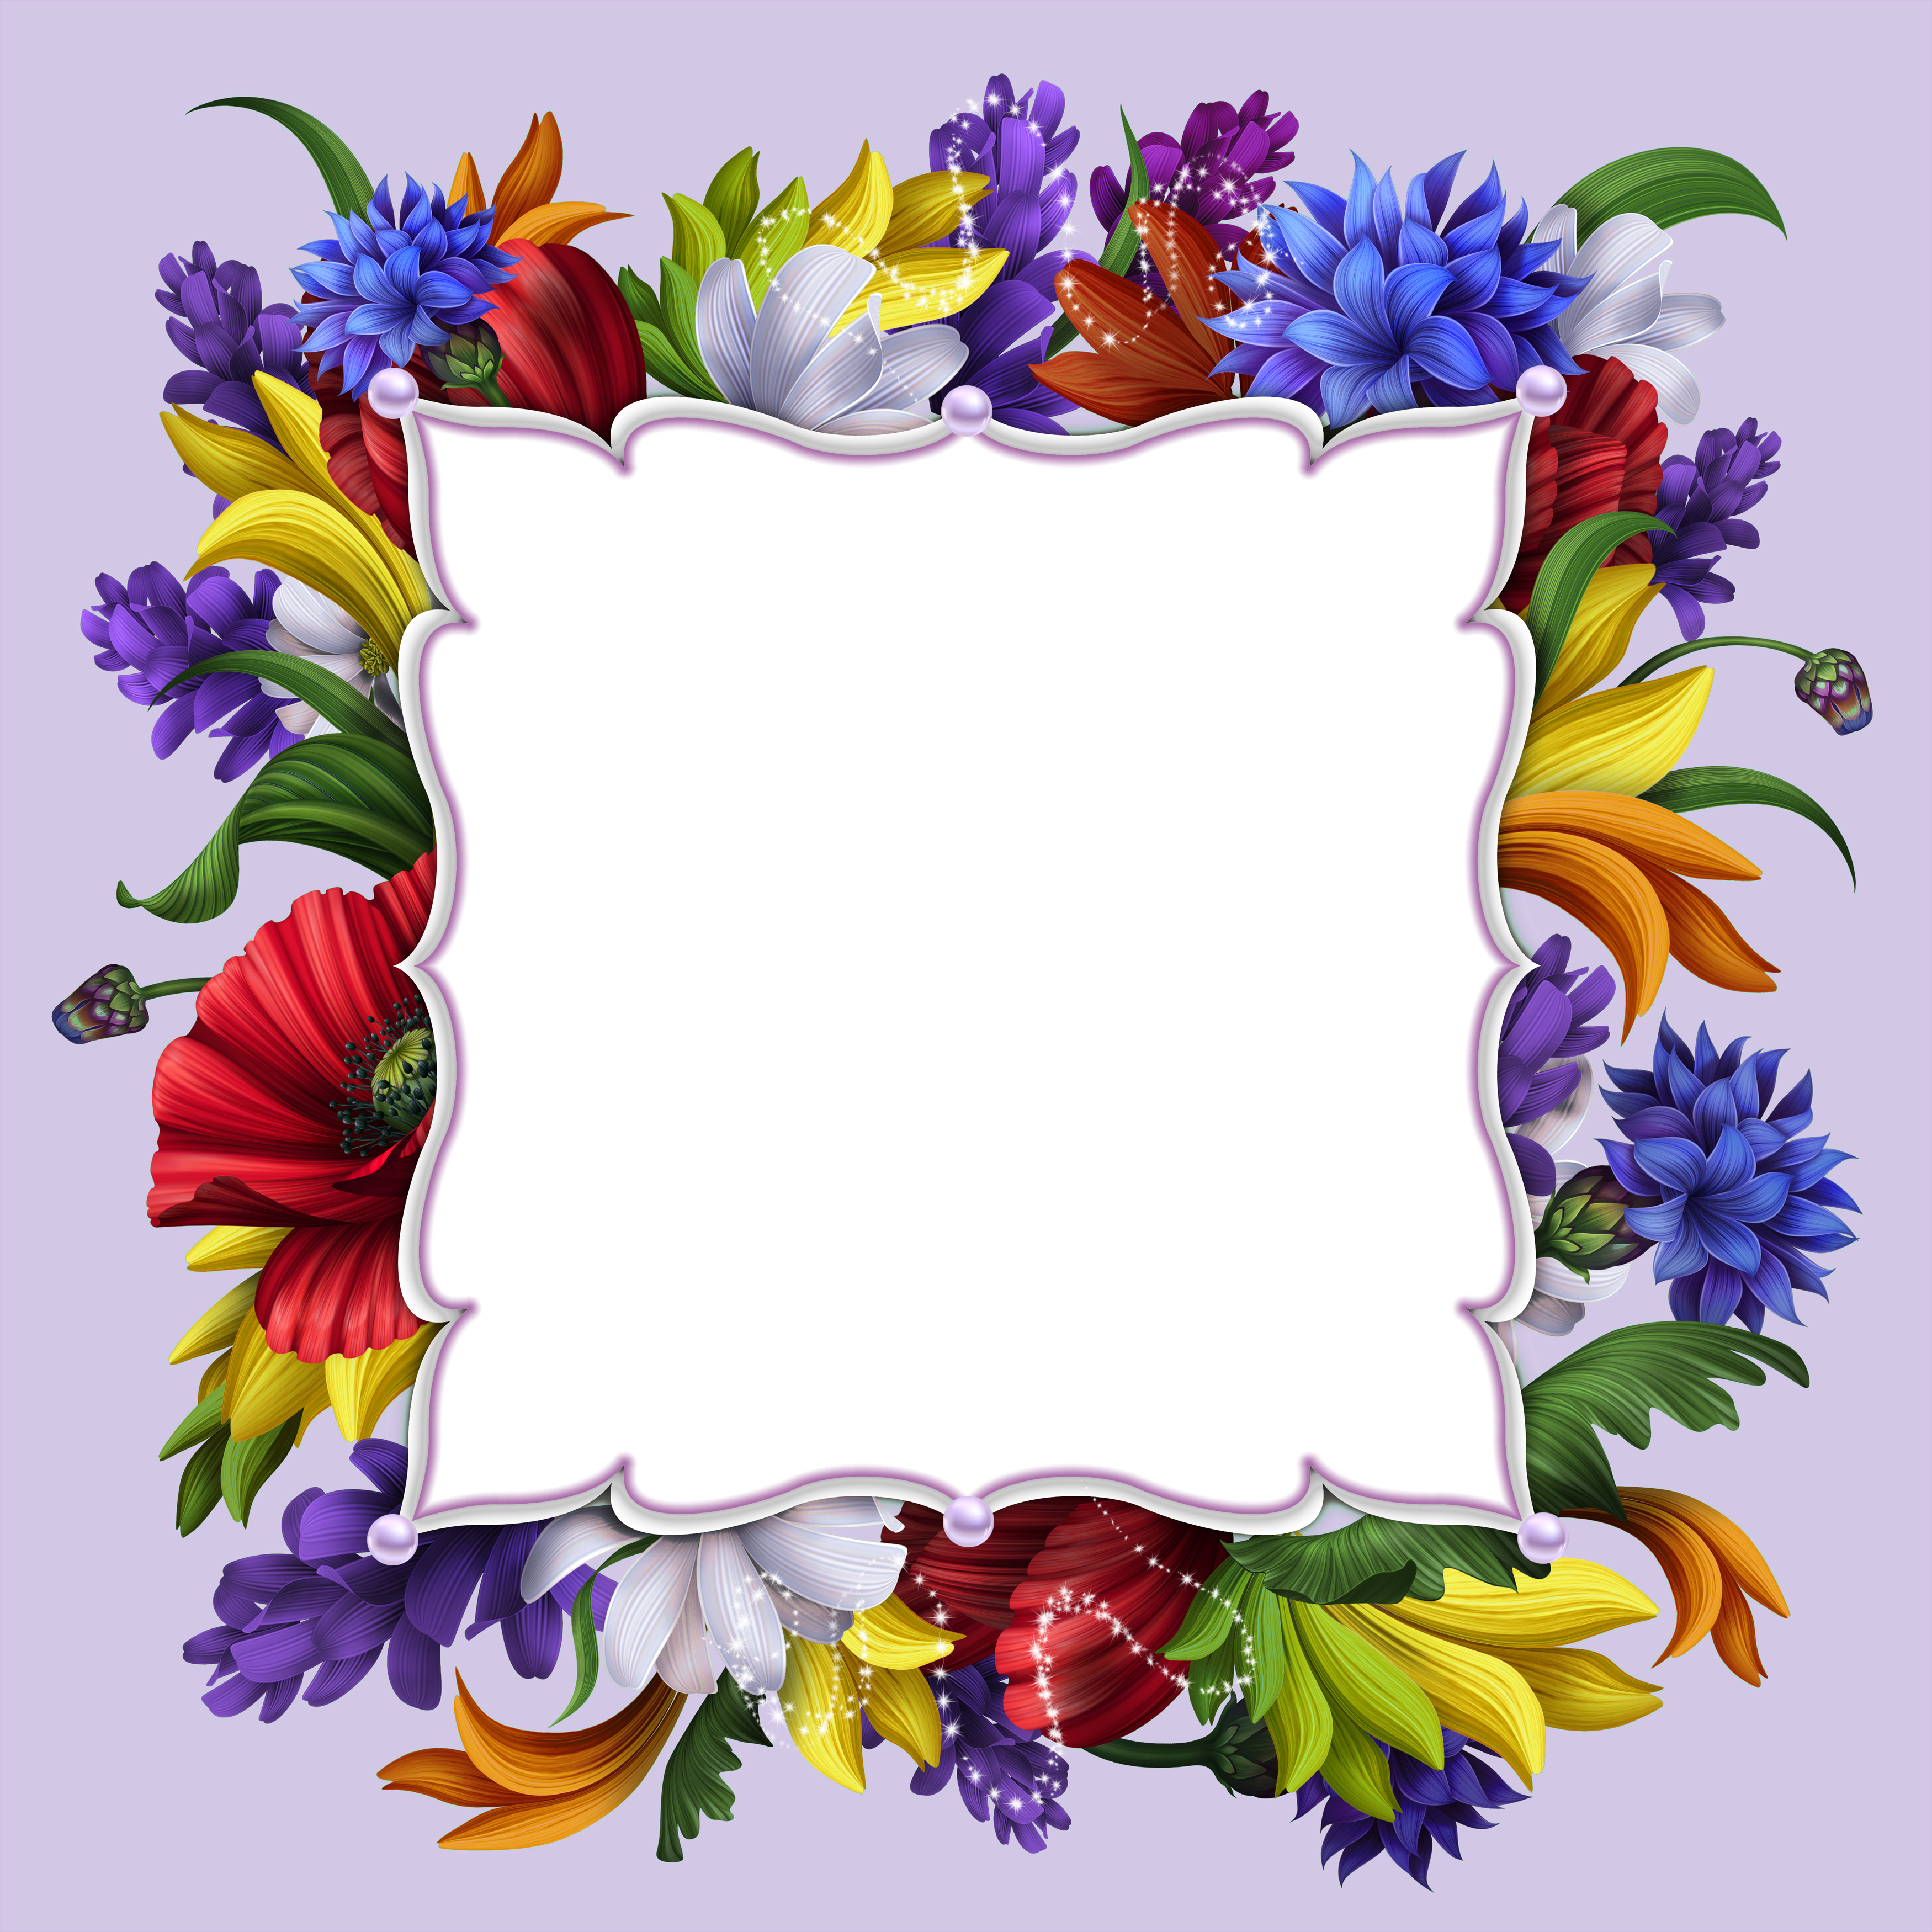 Transparent Purple Floral Frame | Gallery Yopriceville - High-Quality